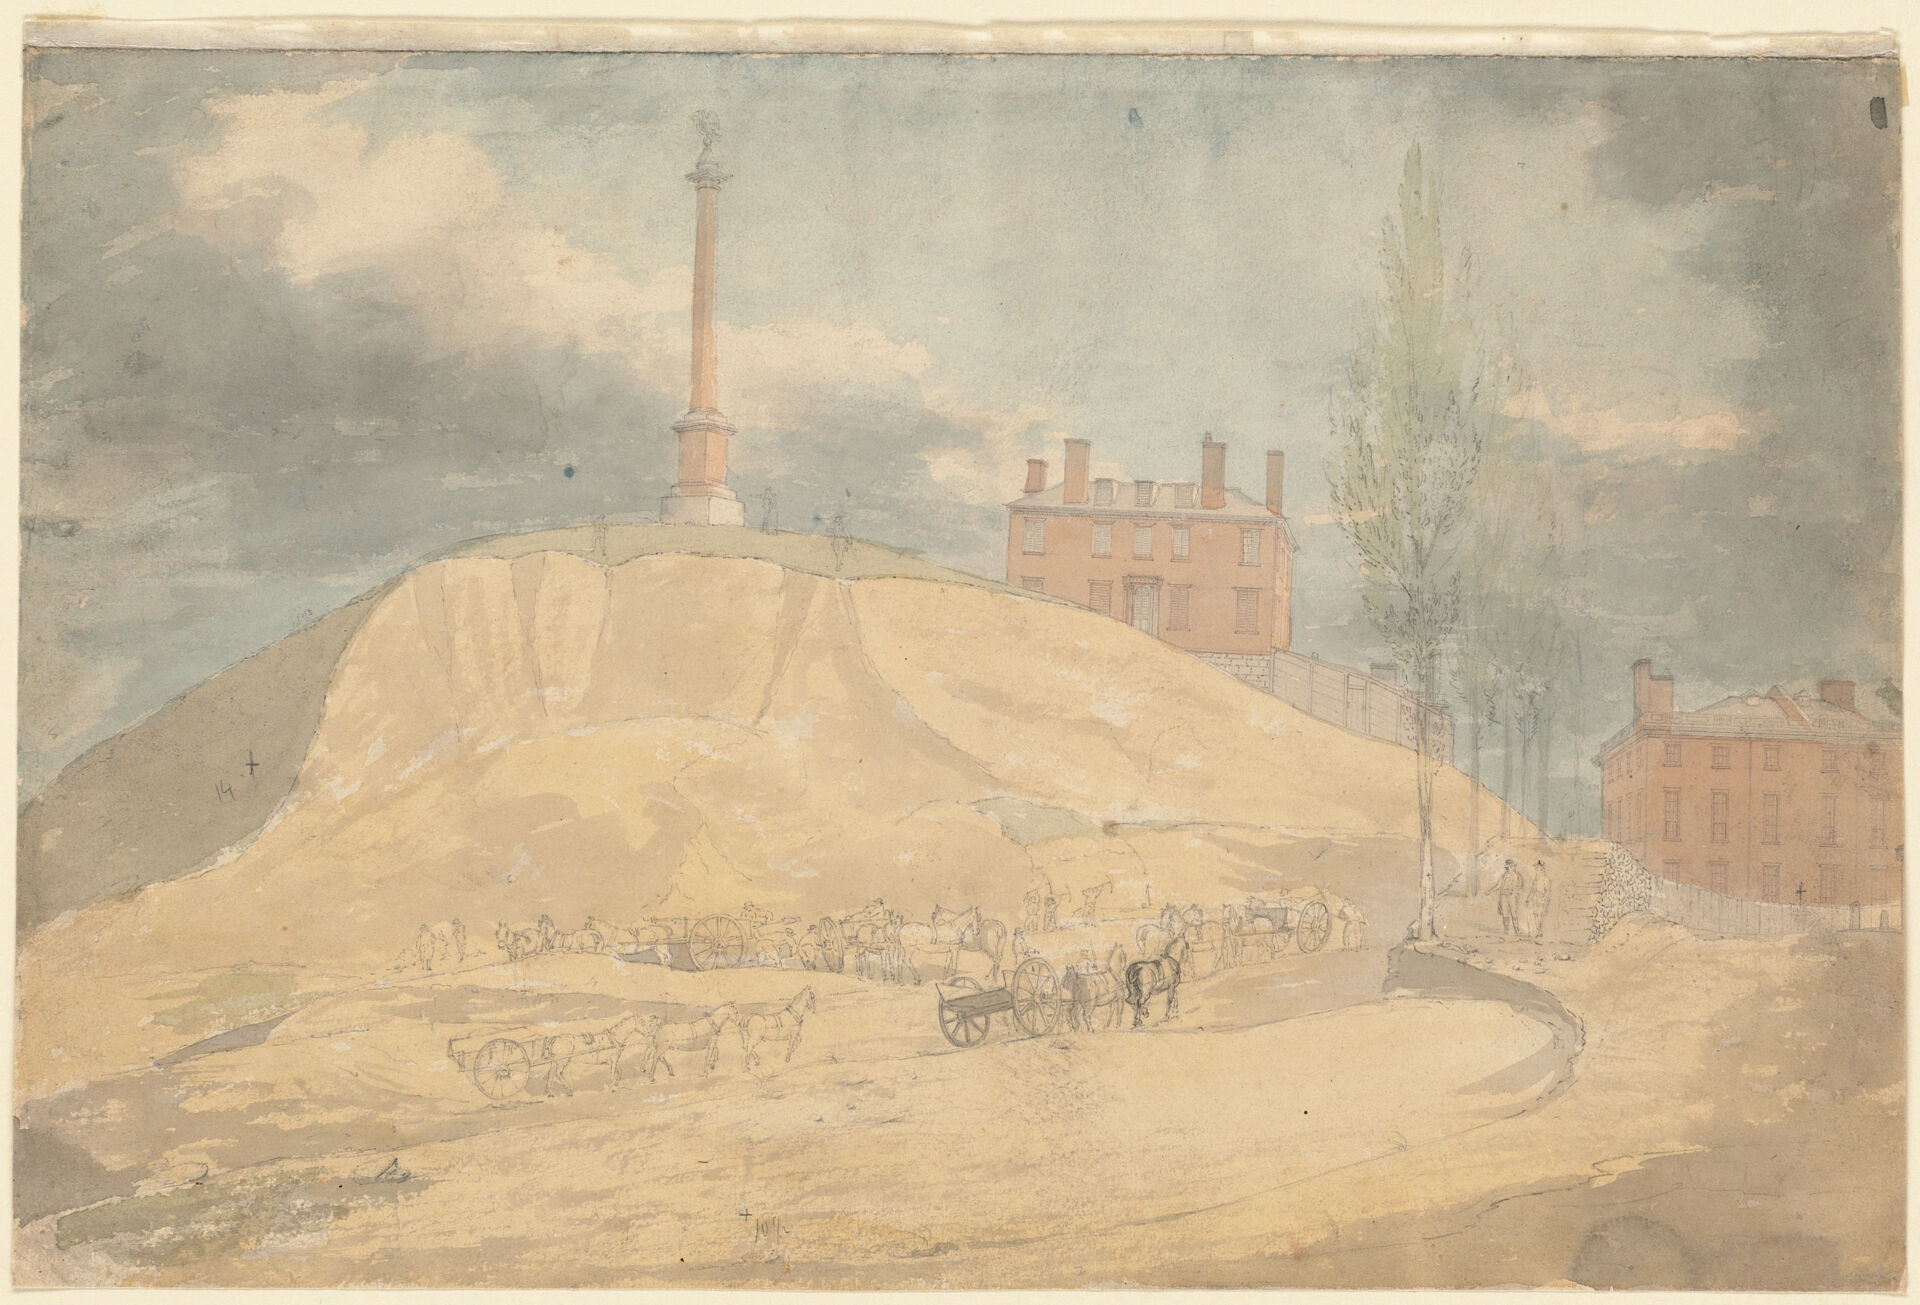 Water color illustration of Beacon Hill with soil being removed